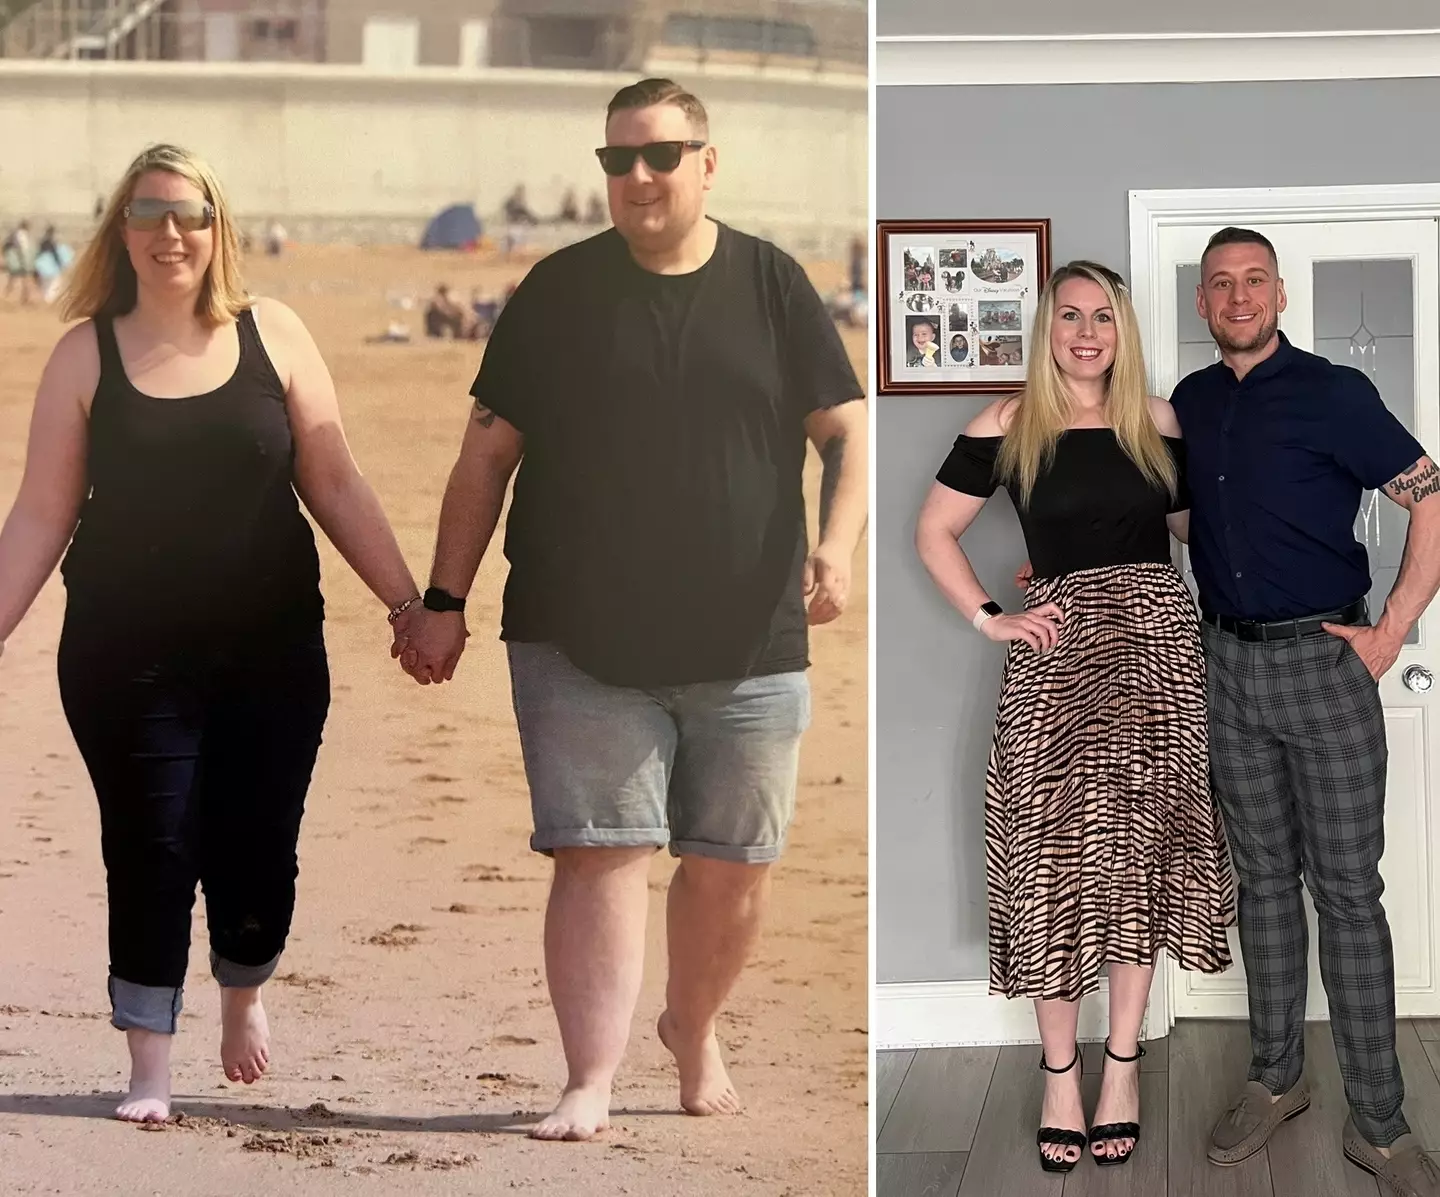 He says the weight loss has made him happier and more confident.